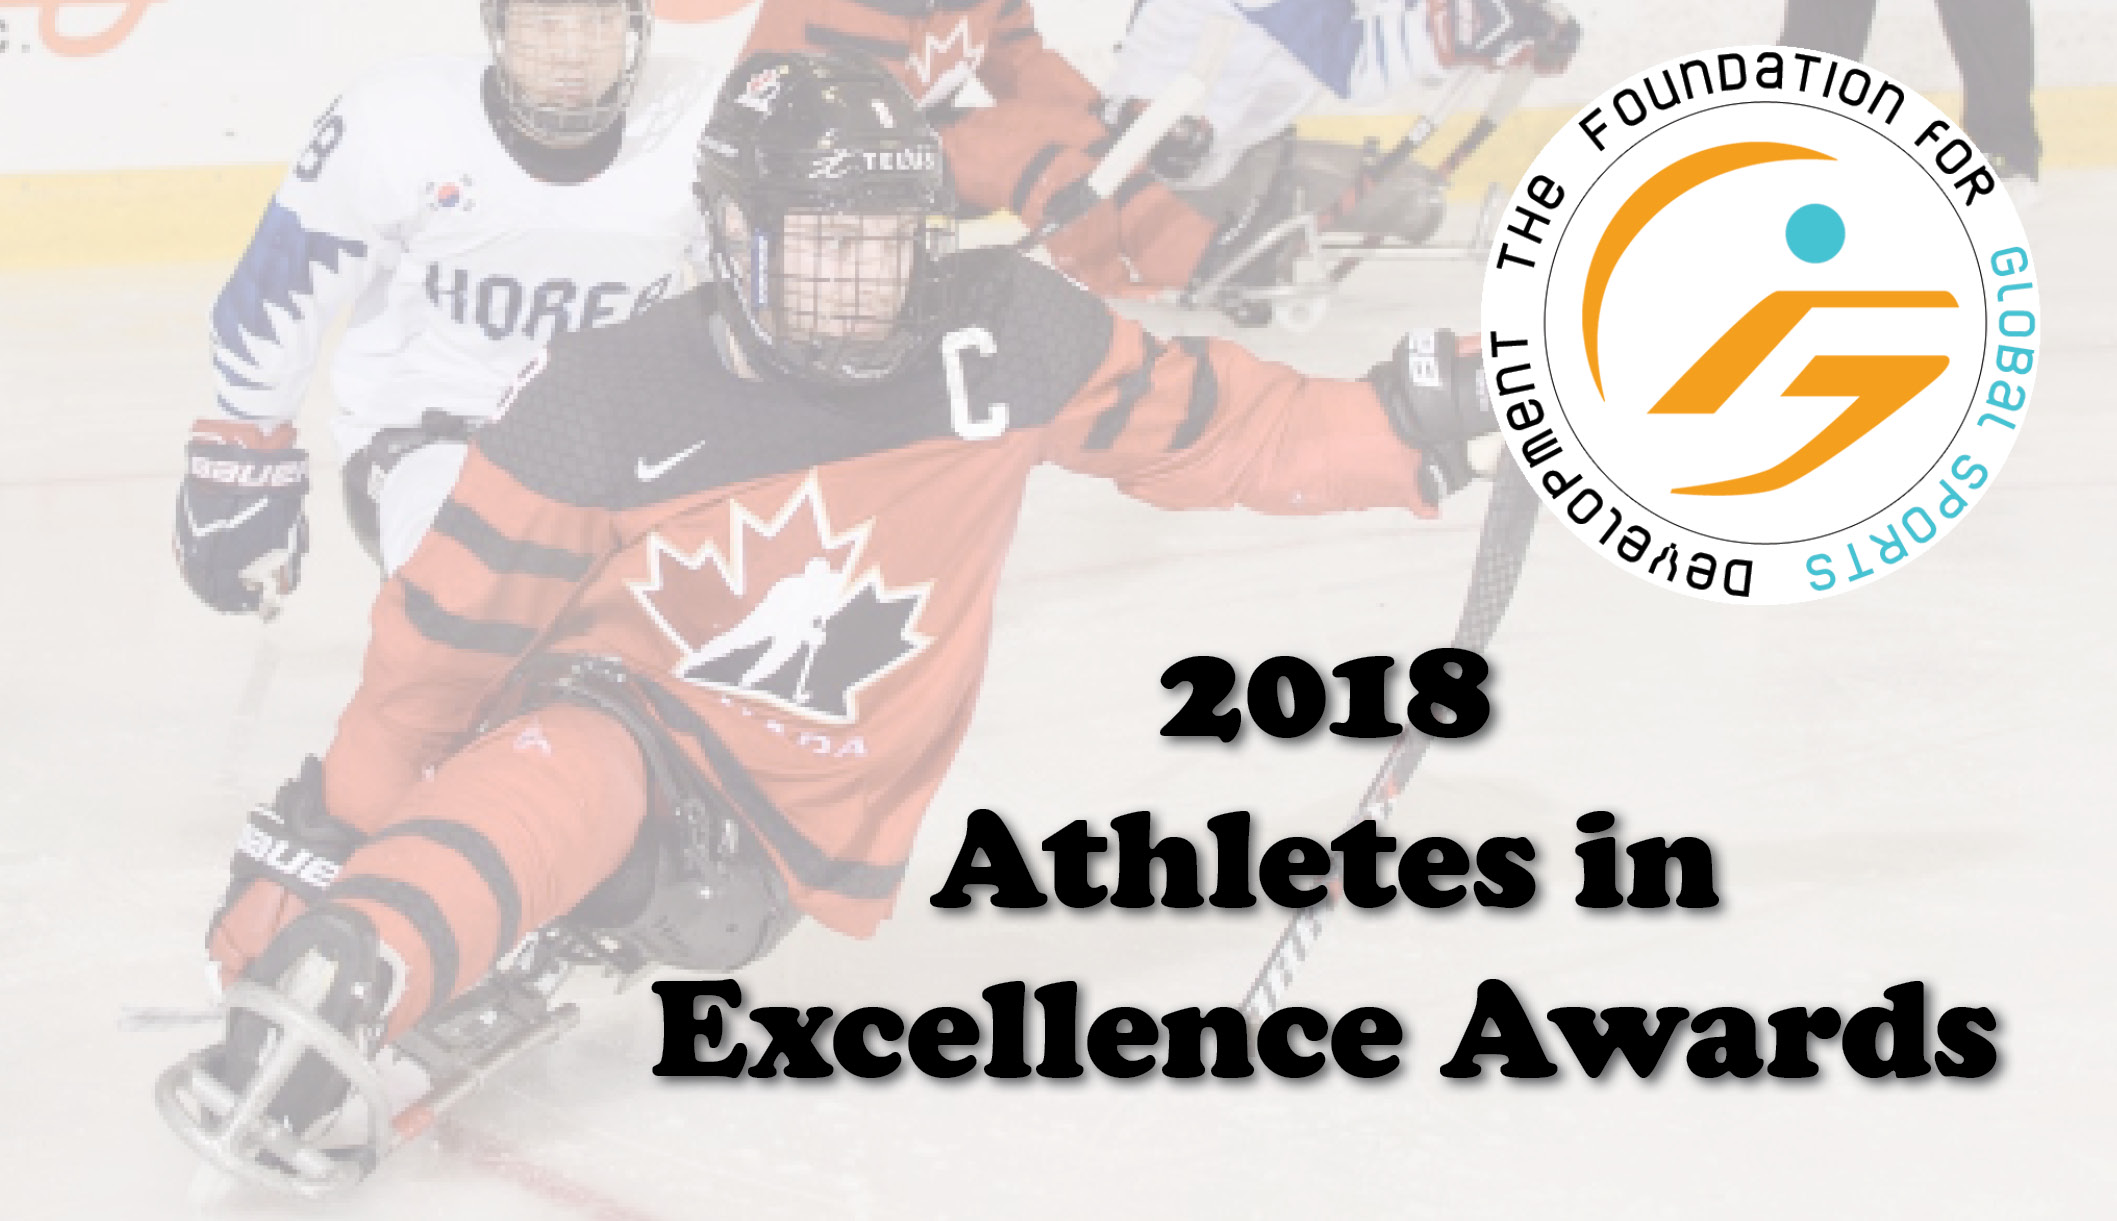 Athletes in Excellence Awards 2018